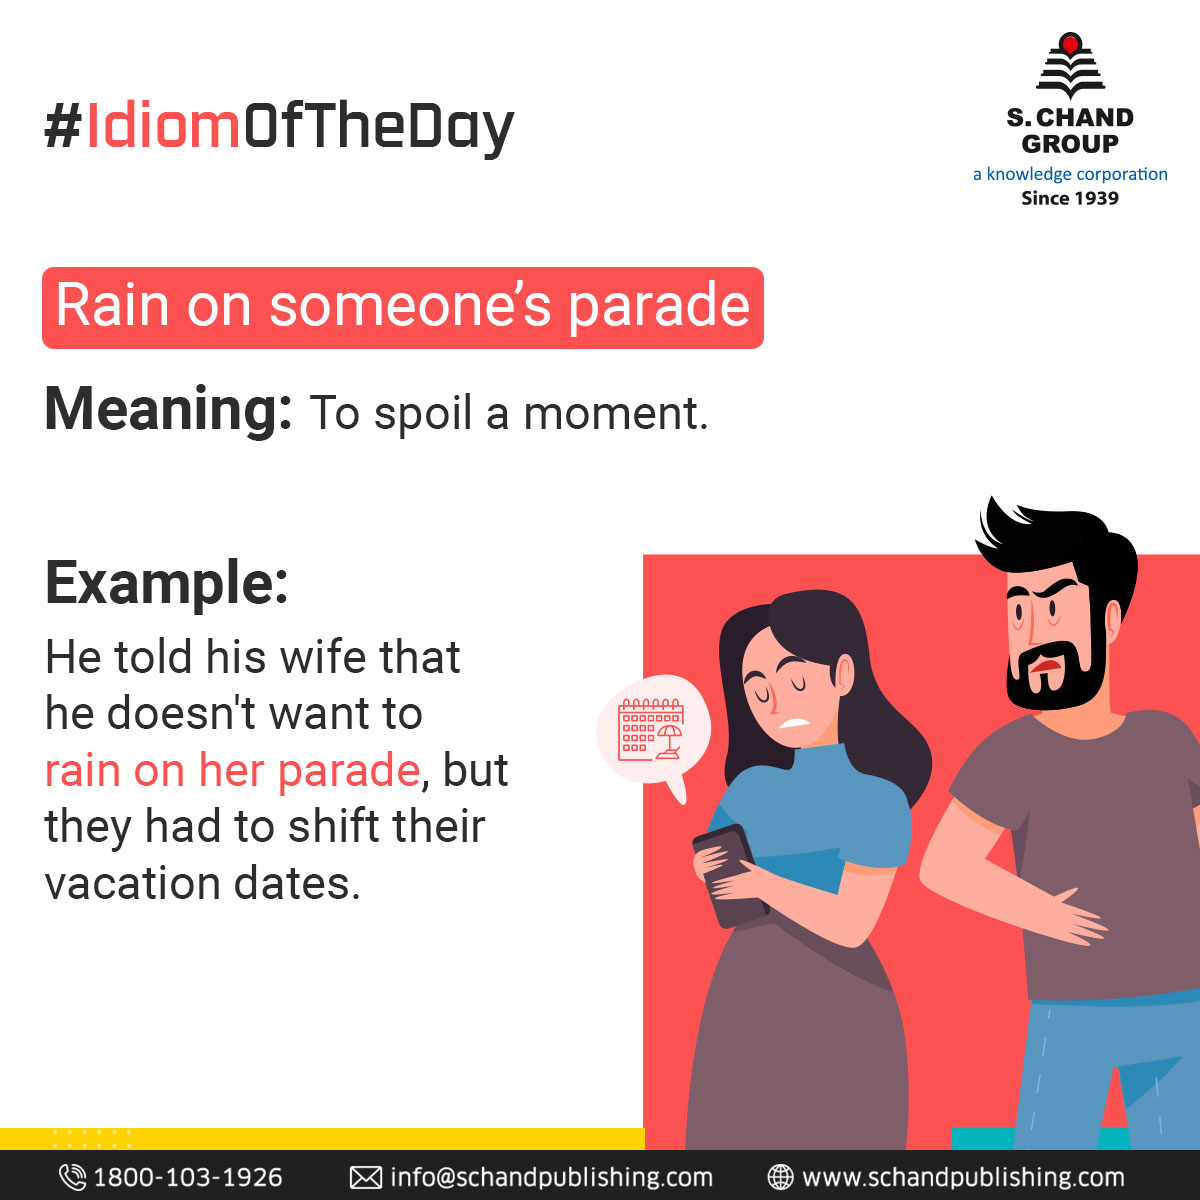 Has anyone ever rained on your parade? Tell us in the comments below.

#SChand #SChandPublishing #EnglishIdioms #Idioms #IdiomOfTheDay #LanguageSkills #ExpandYourVocabulary #CommunicationSkills #BoostYourKnowledge